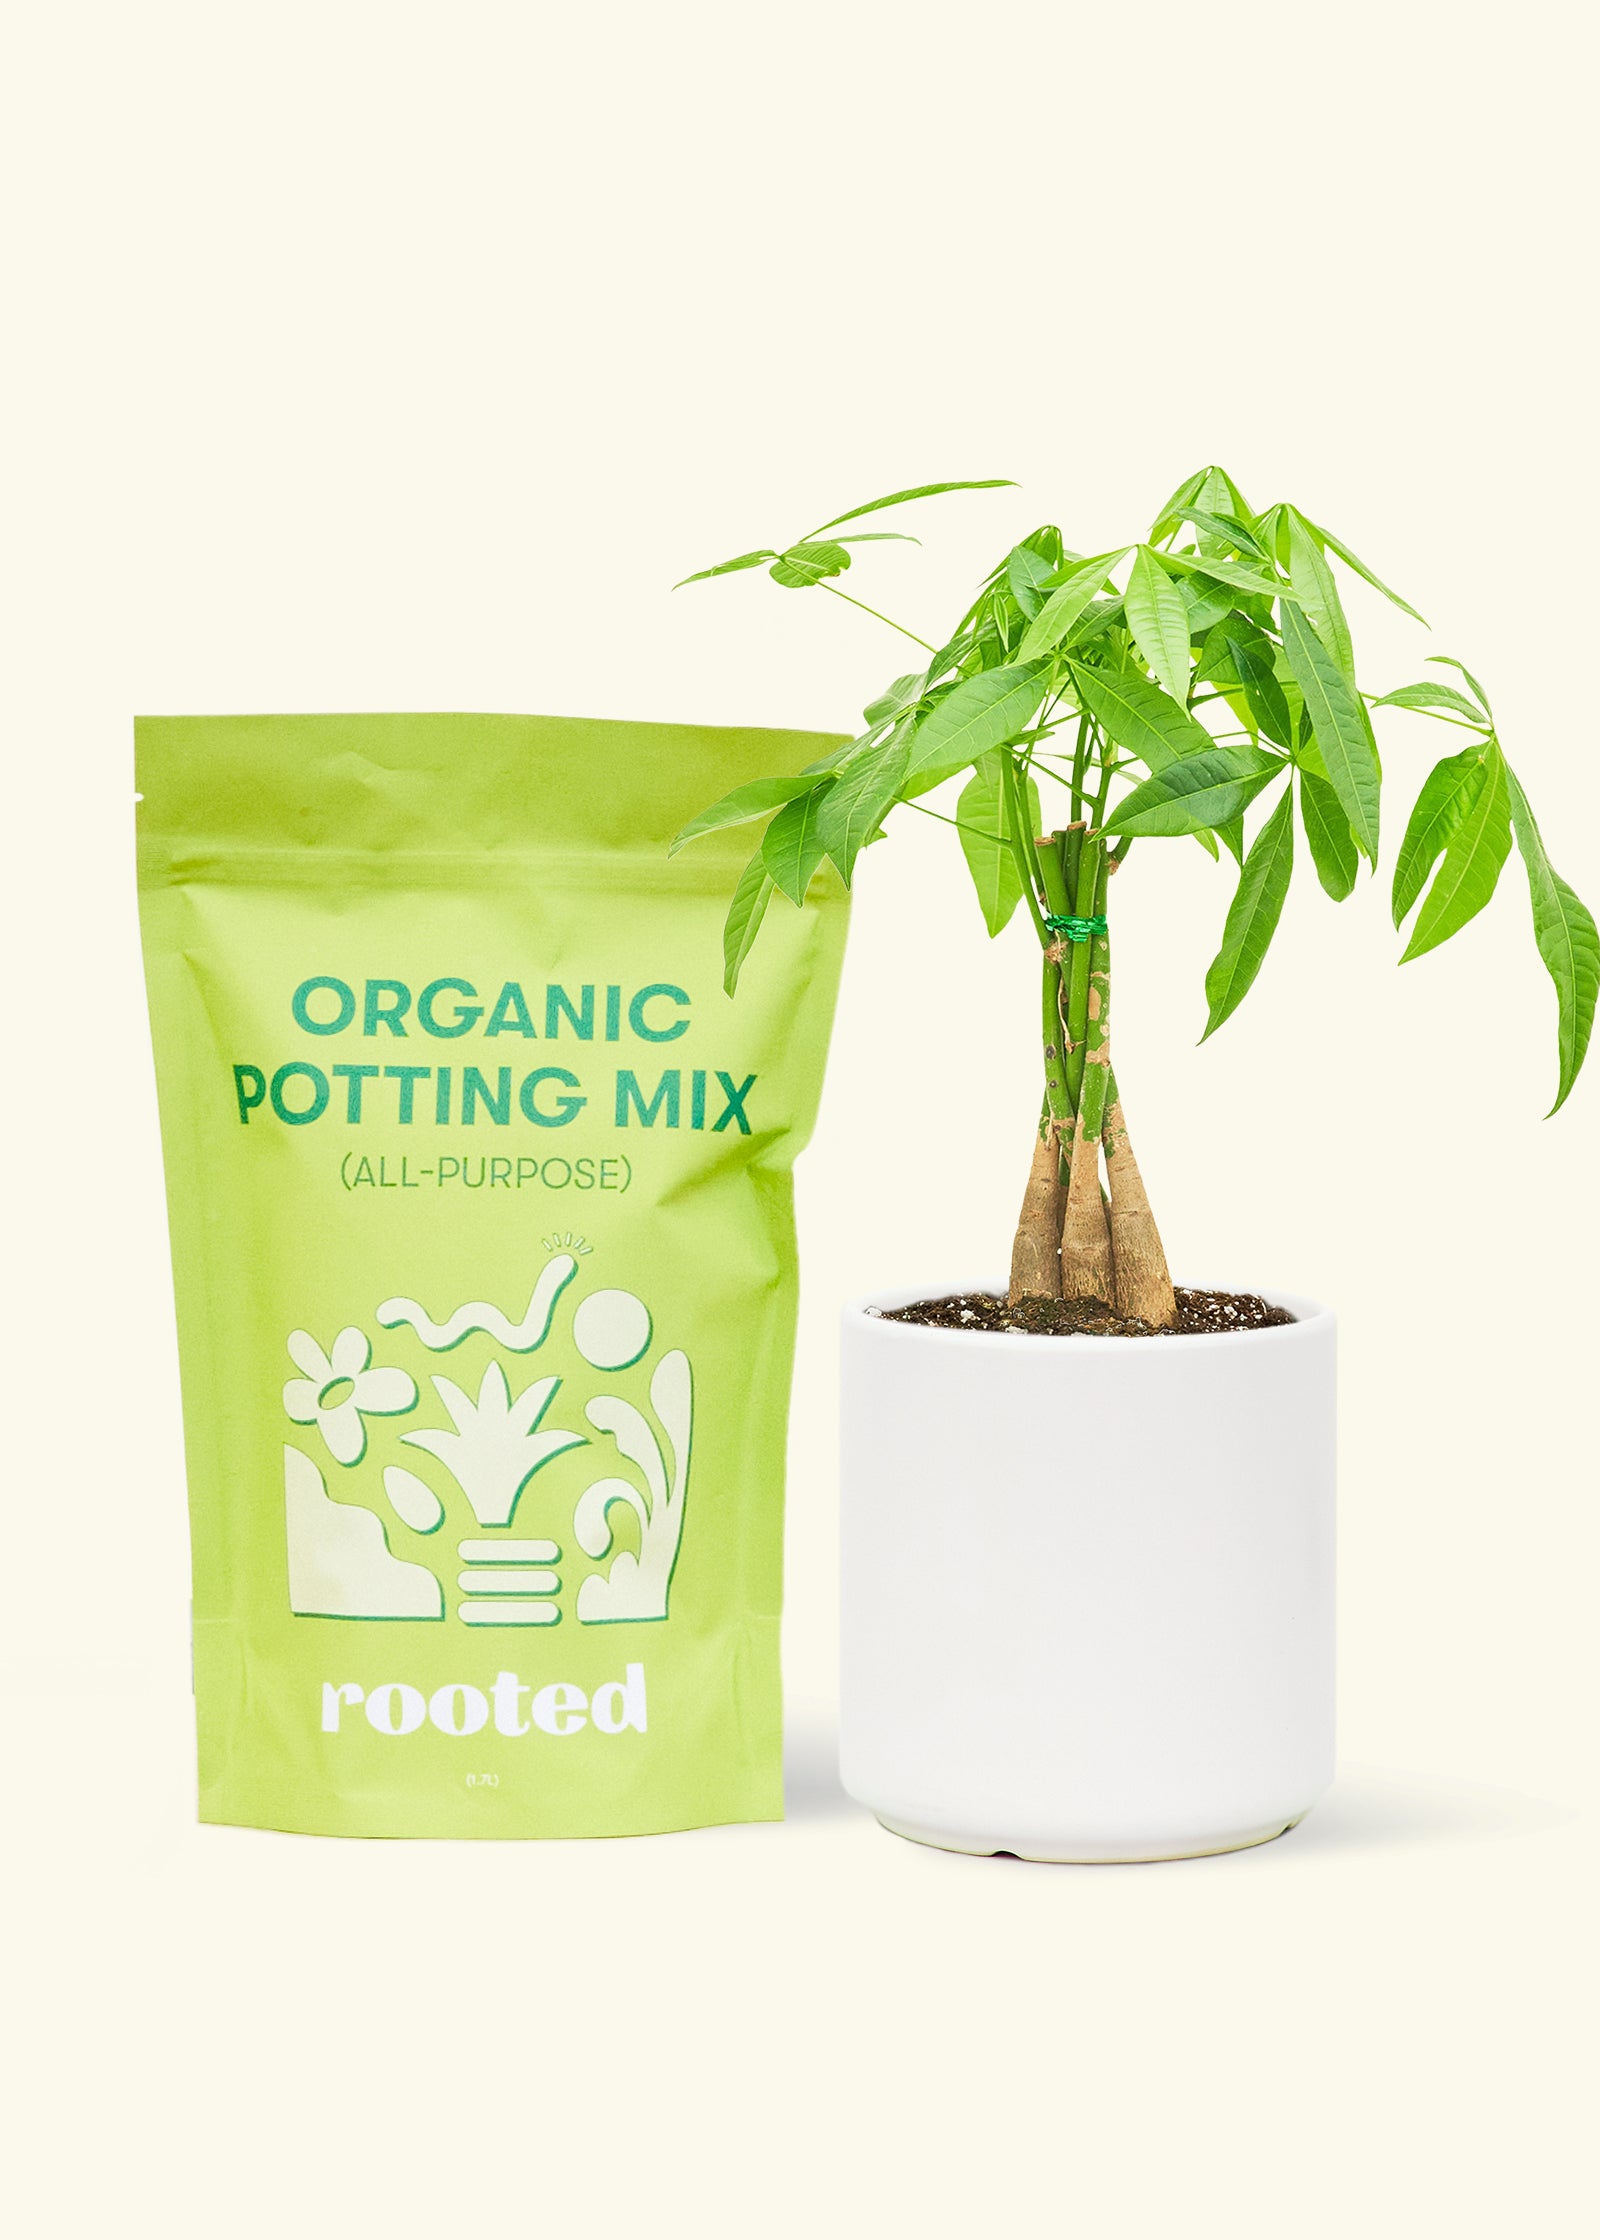 A bag of Organic Potting Mix to the left of a Braided Money Tree in a white cylinder ceramic pot.